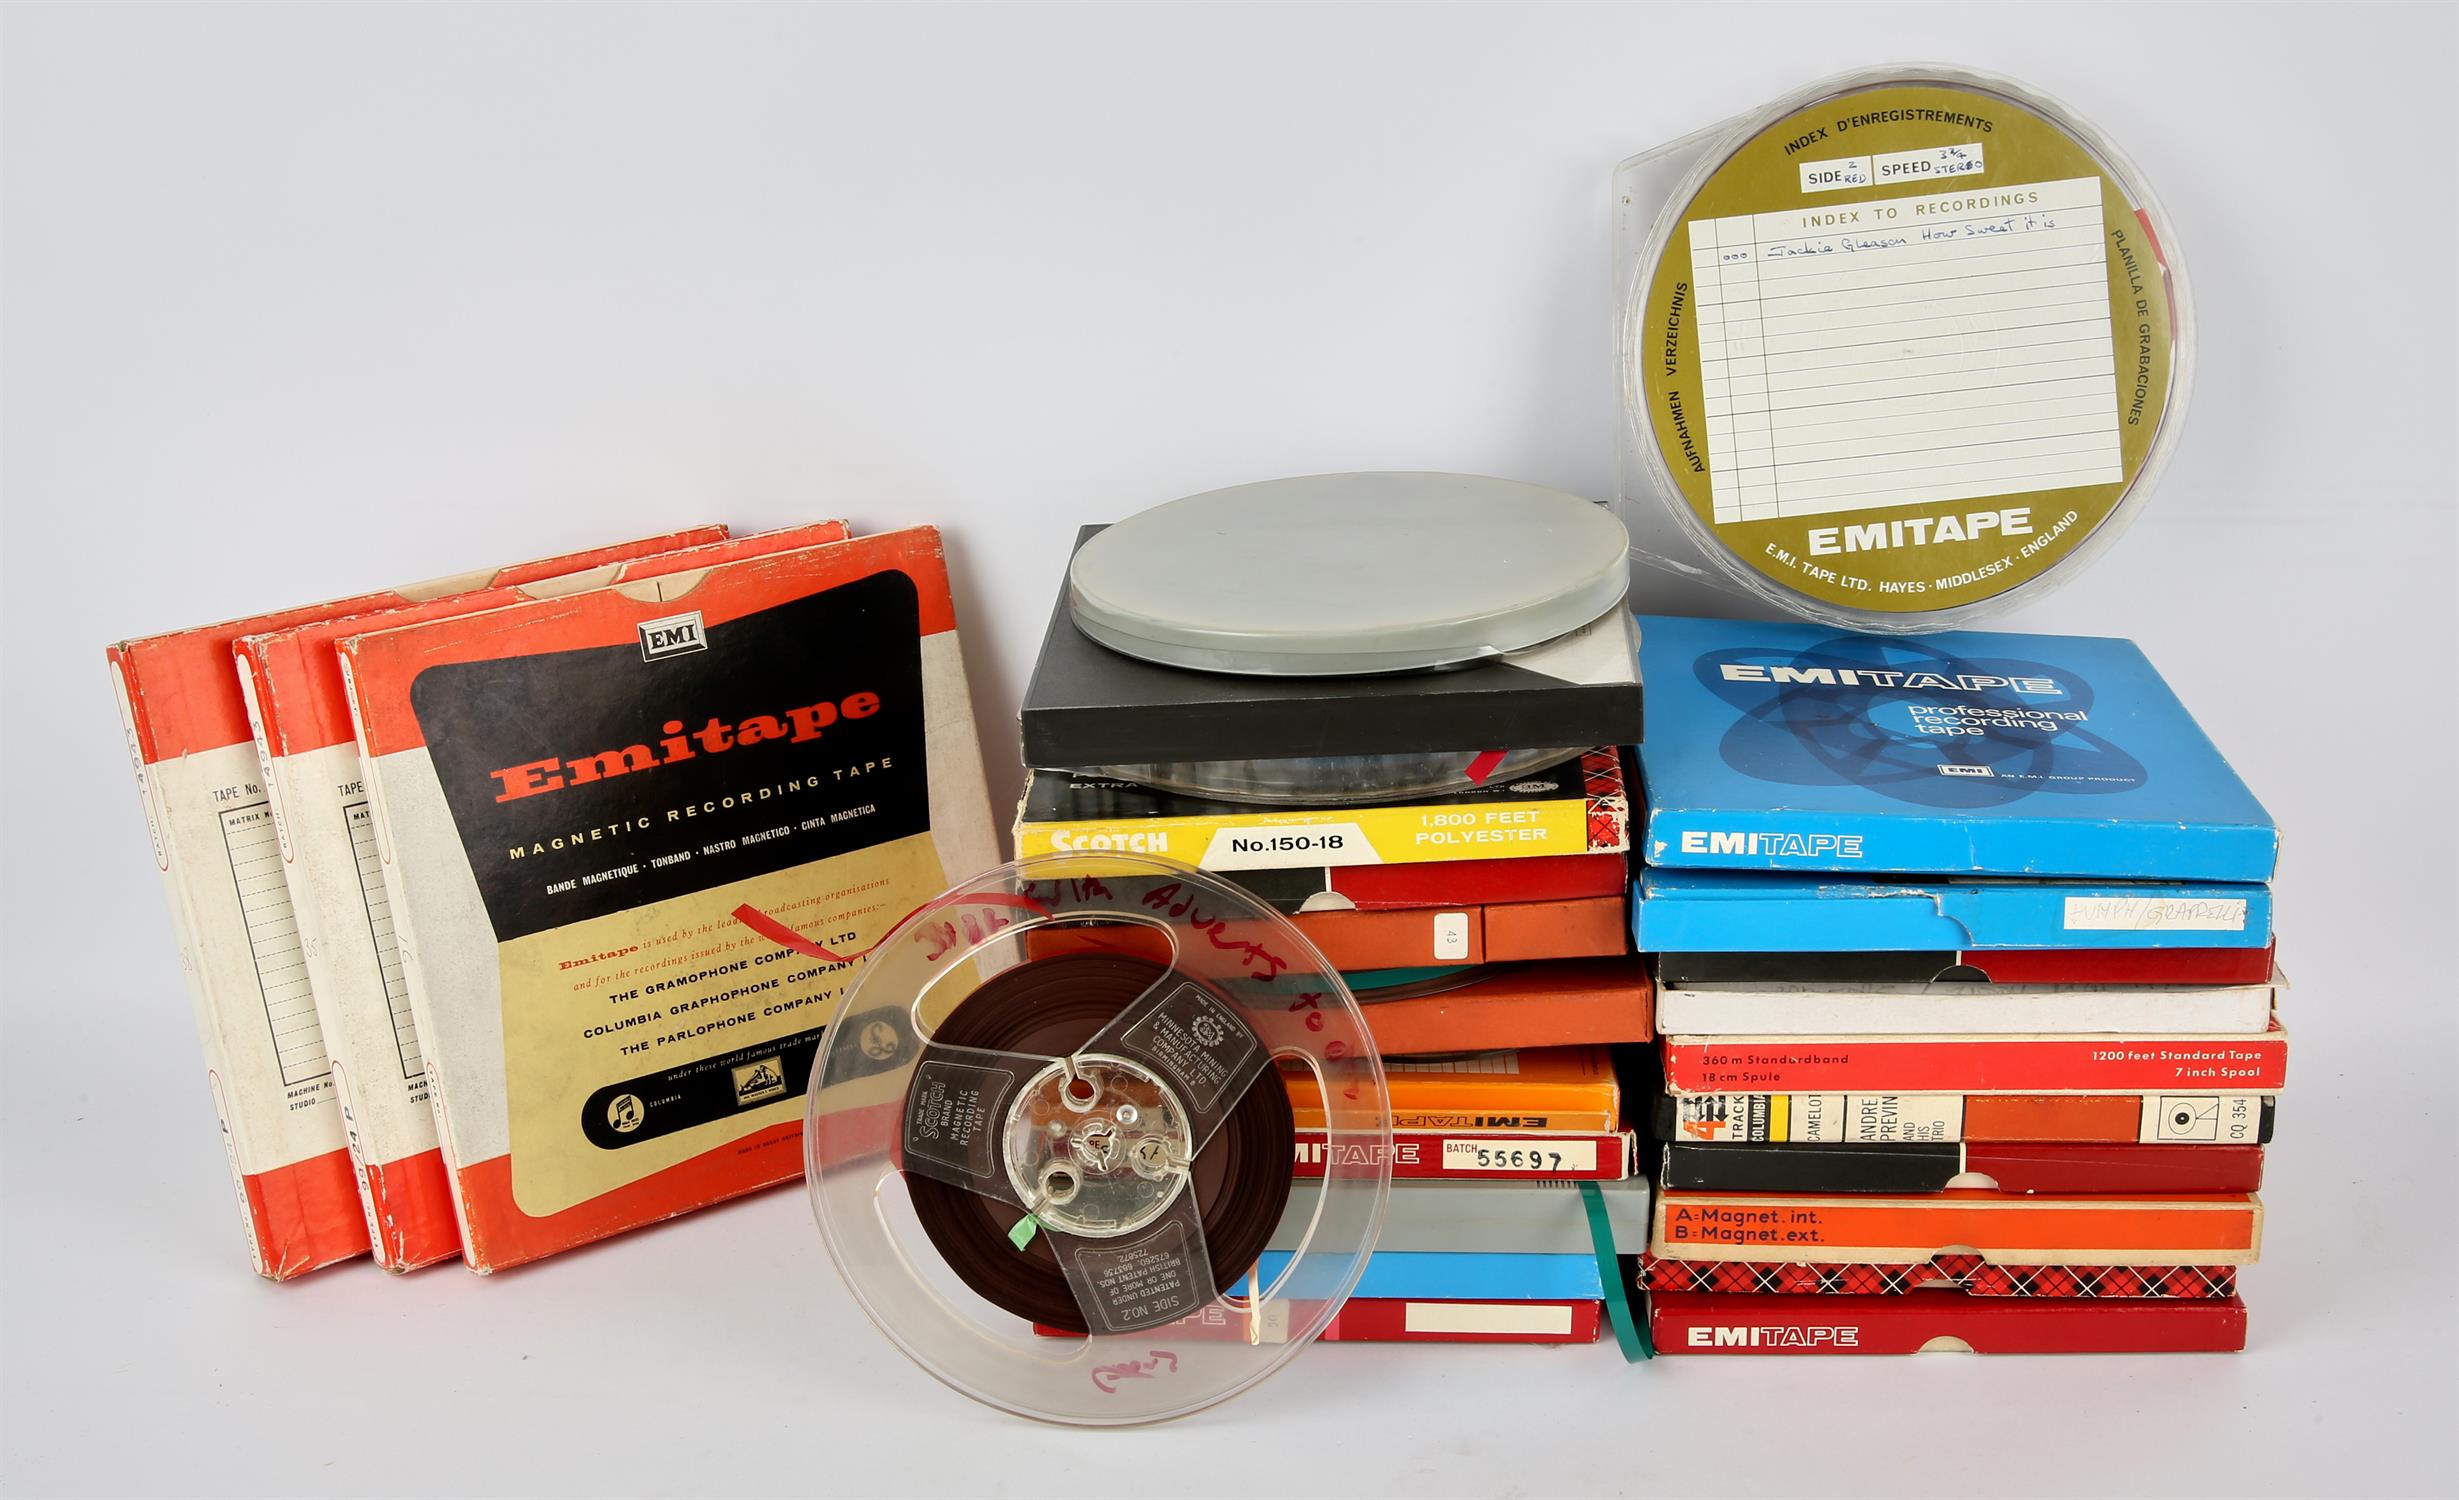 Reel to Reel tapes - Old 1950s / 1960s radio programs such as Need to Call, Hancock's Half Hour,